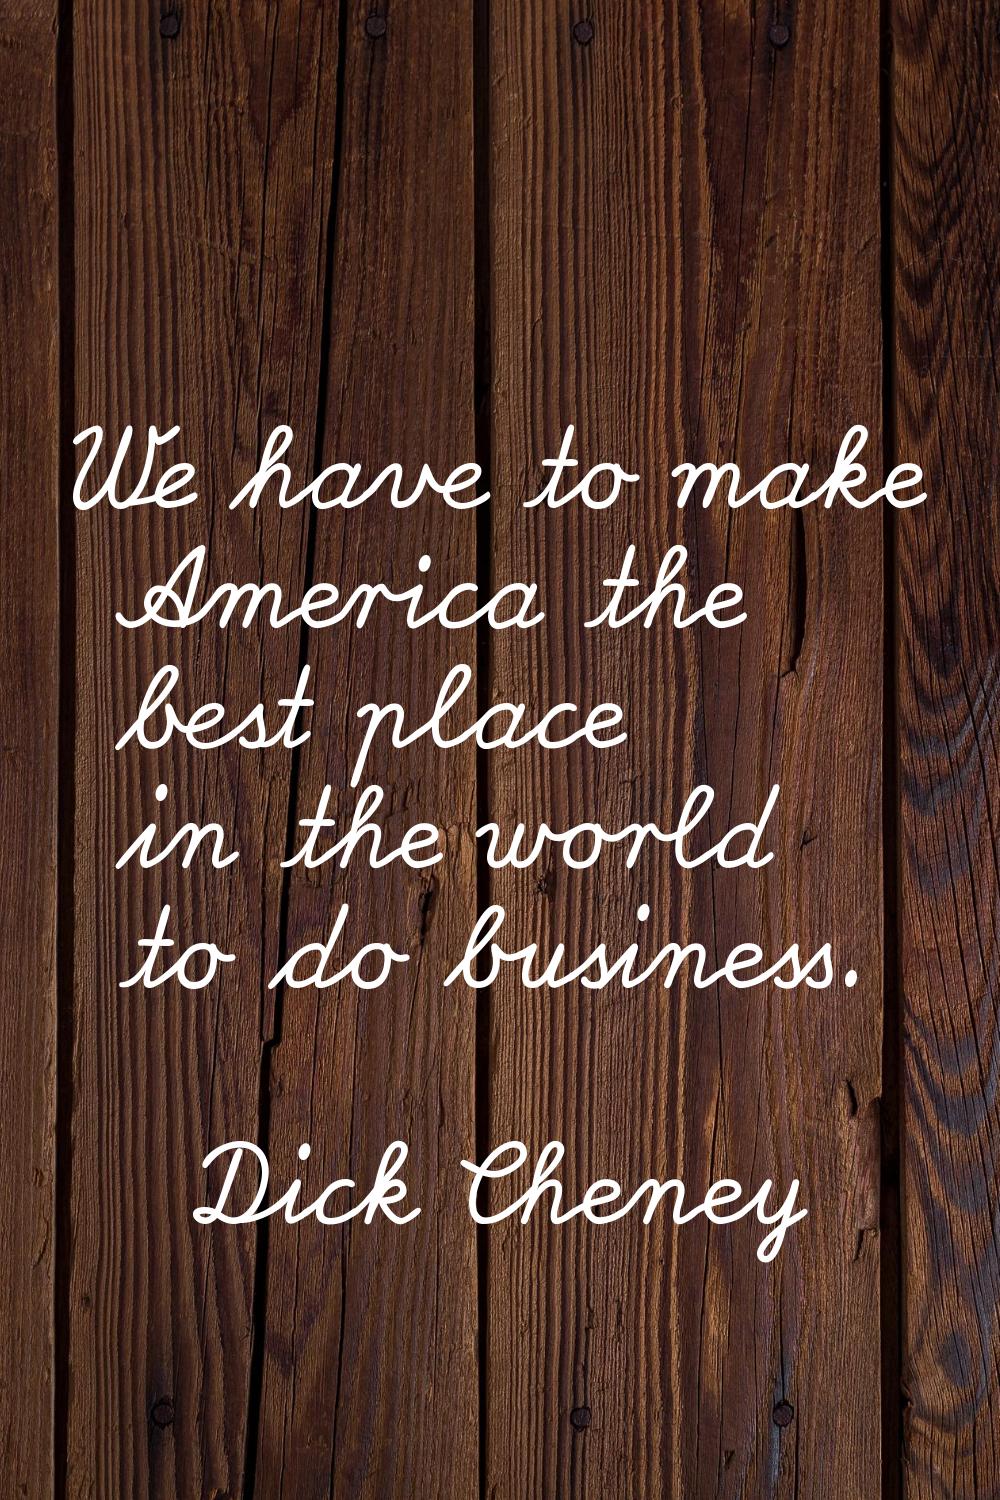 We have to make America the best place in the world to do business.